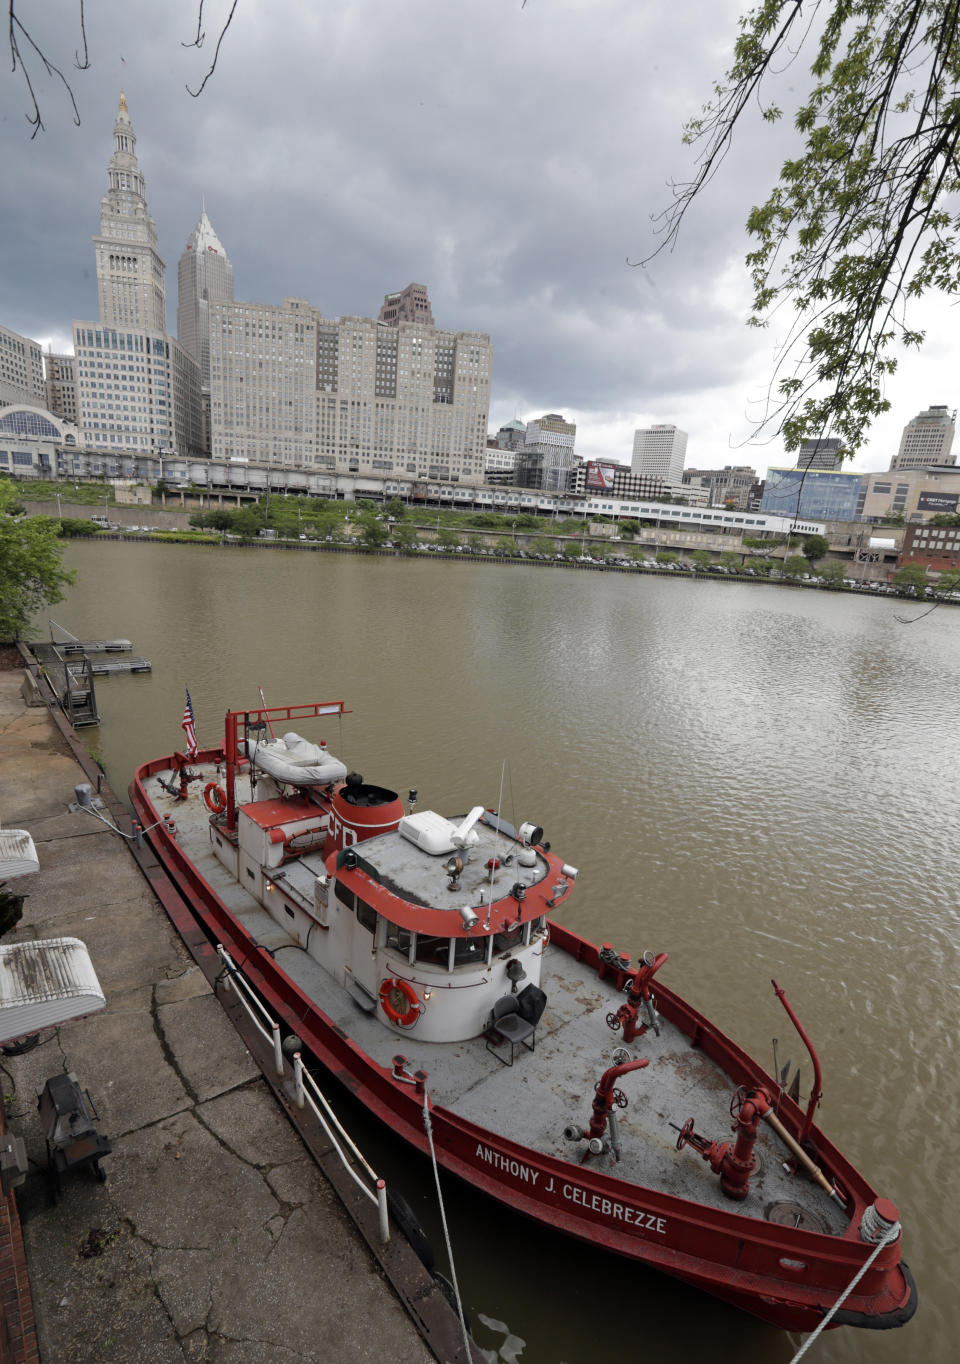 The Anthony J. Celebrezze rests on the Cuyahoga River, Thursday, June 13, 2019, in Cleveland. The fire boat extinguished hot spots on a railroad bridge torched by burning fluids and debris on the Cuyahoga River in 1969. (AP Photo/Tony Dejak)